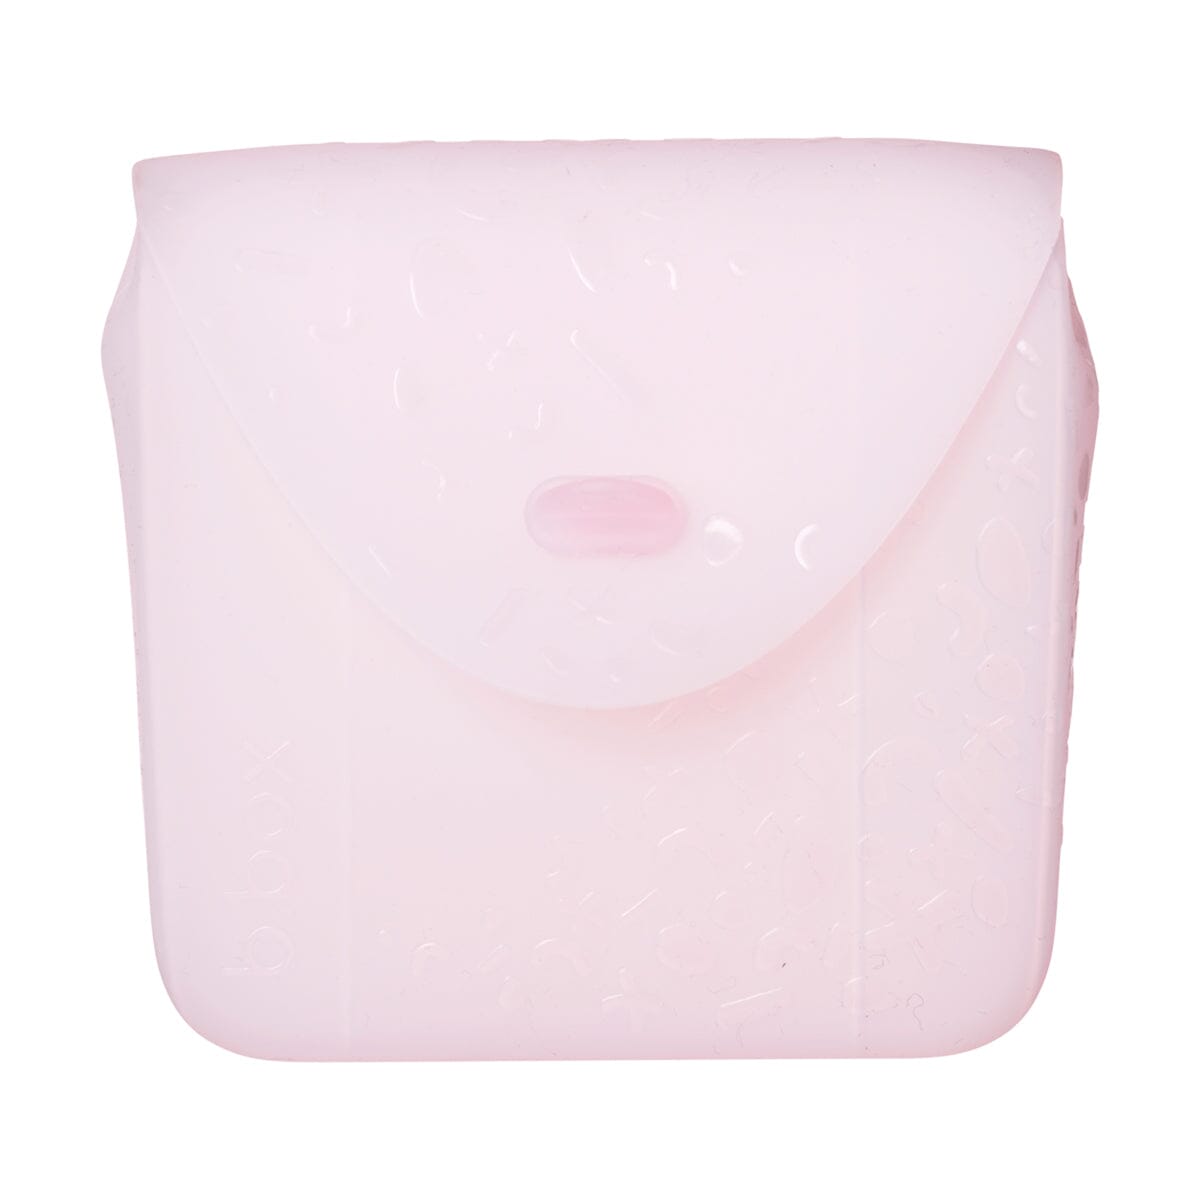 Silicone Lunch Pocket (Berry)